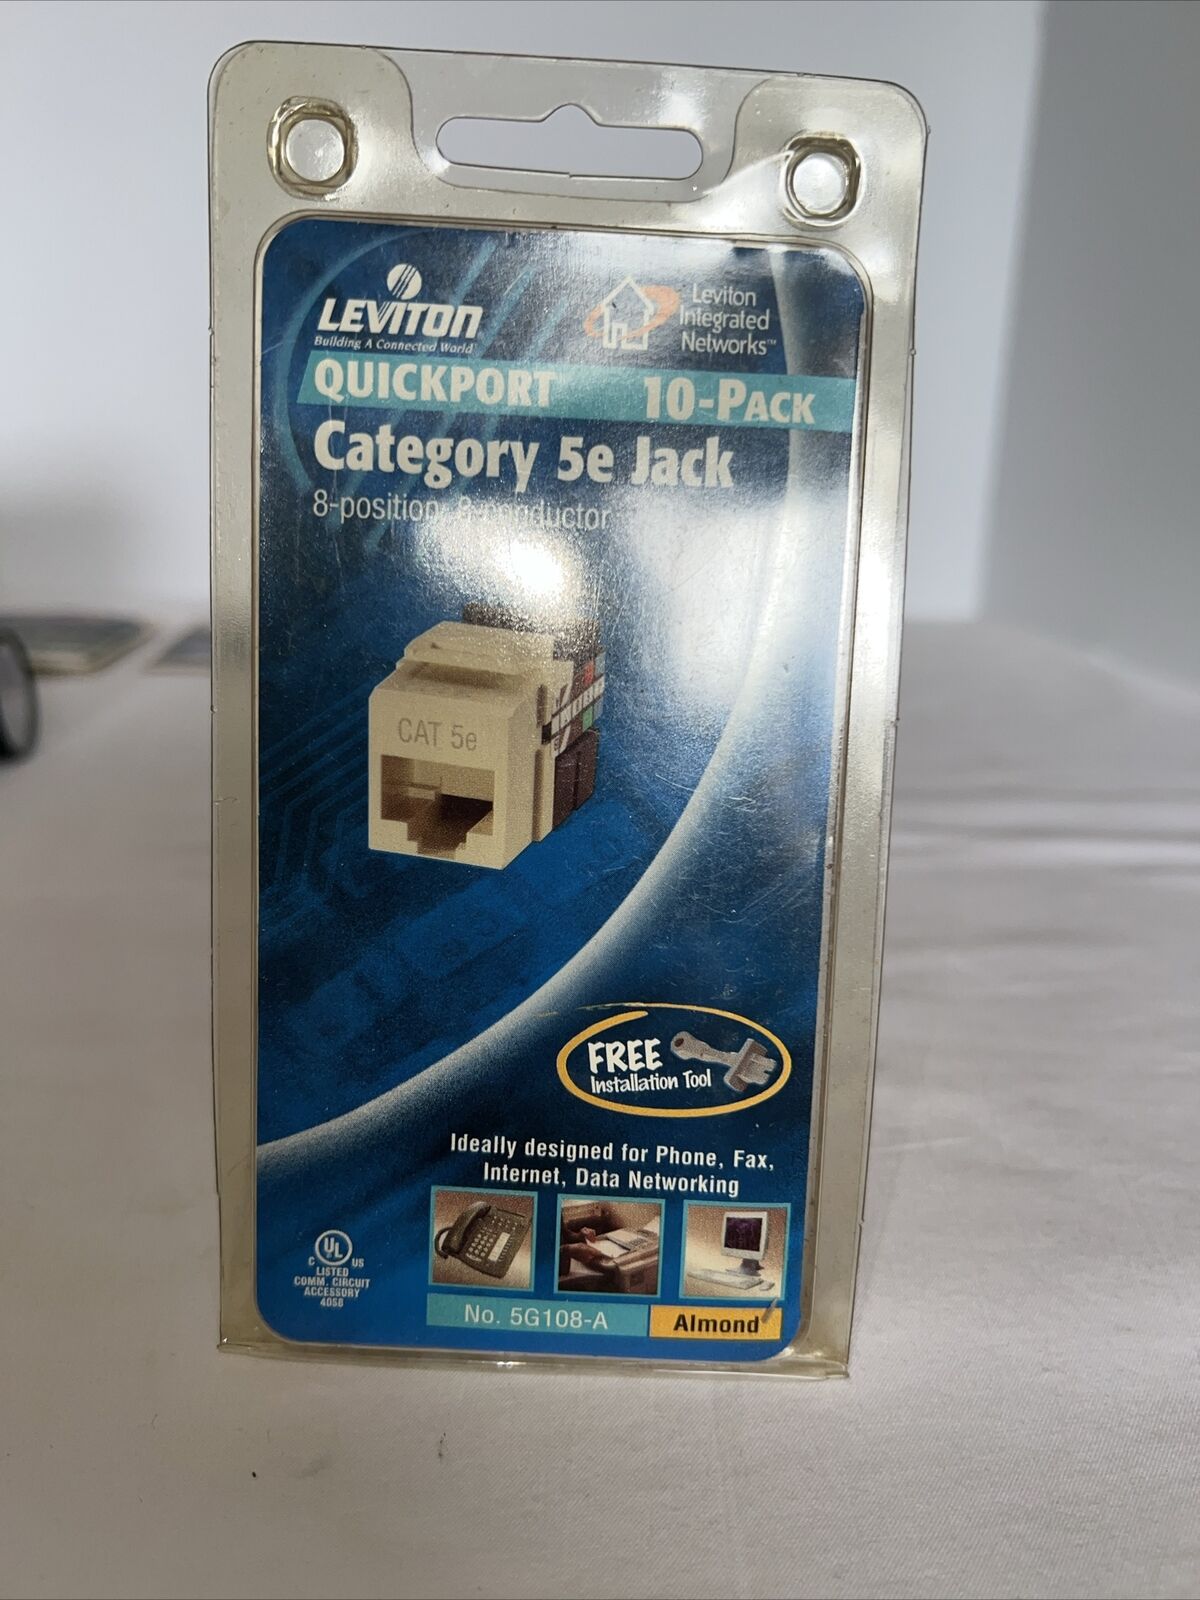 LEVITON 10 PACK CATEGORY 5e JACK BRAND NEW IN THE ORIGINAL PACKAGE NEVER OPENED